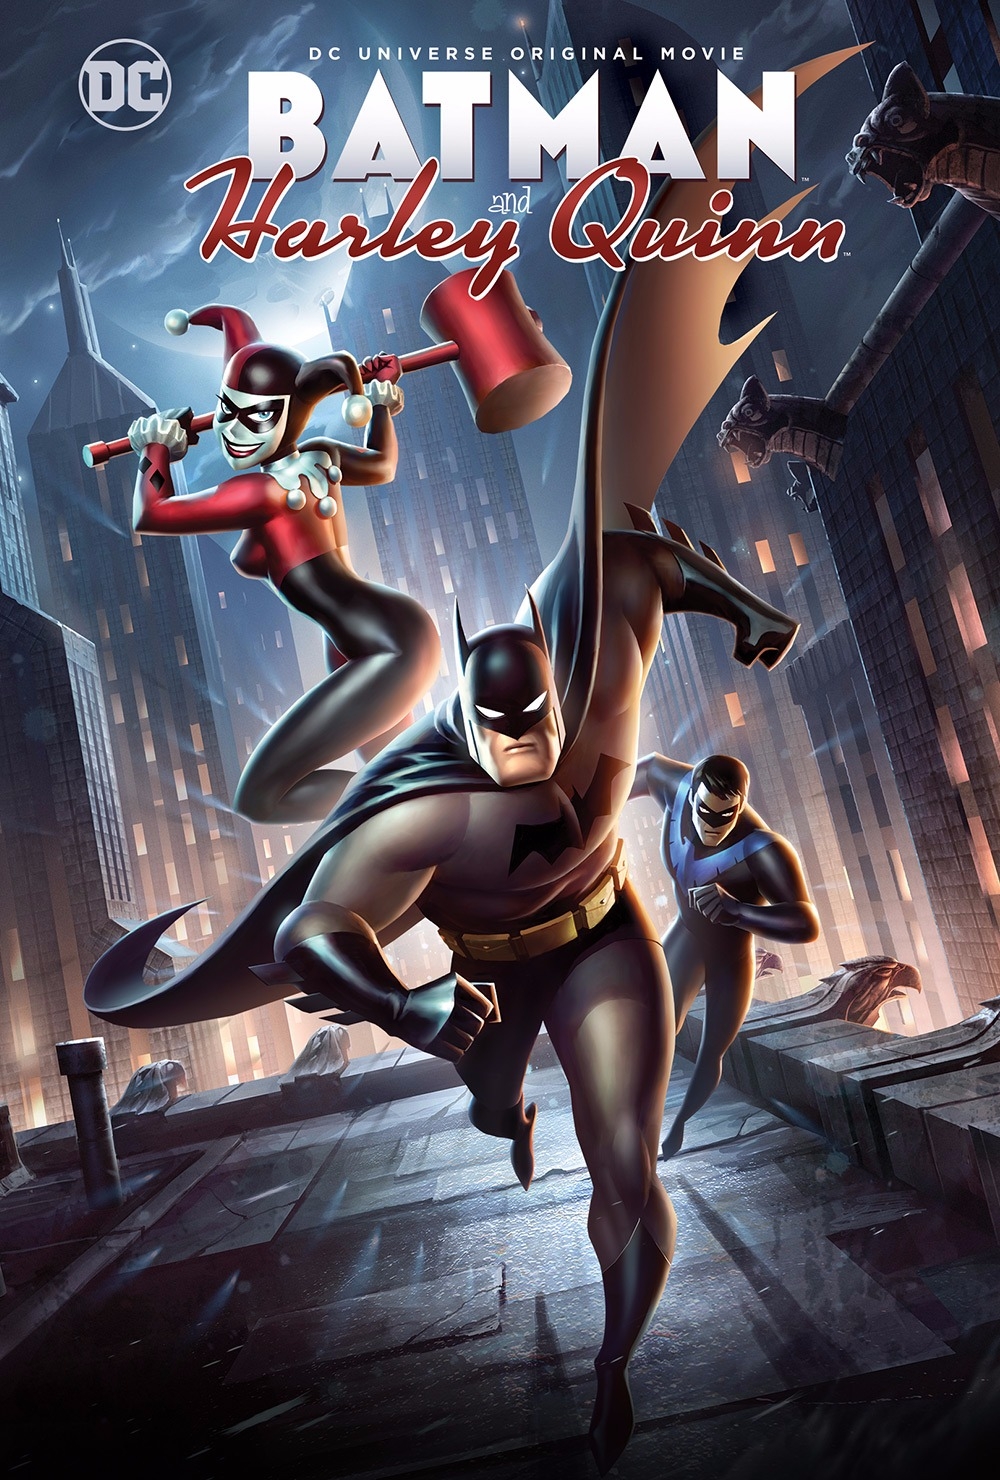 A Dad and Kid review the Batman and Harley Quinn movie